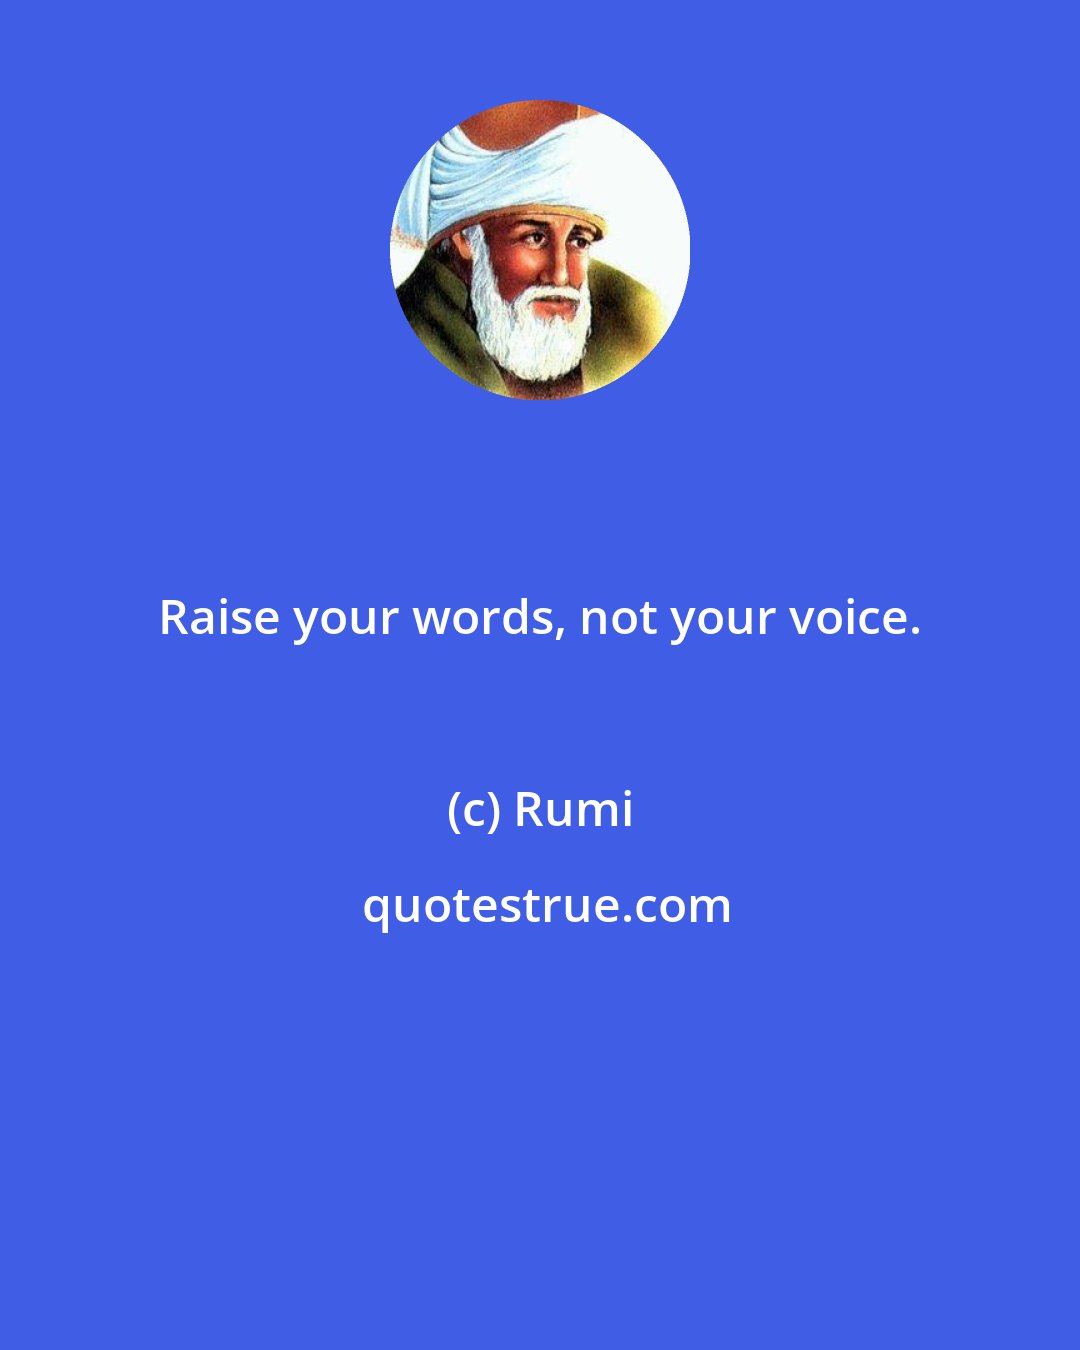 Rumi: Raise your words, not your voice.